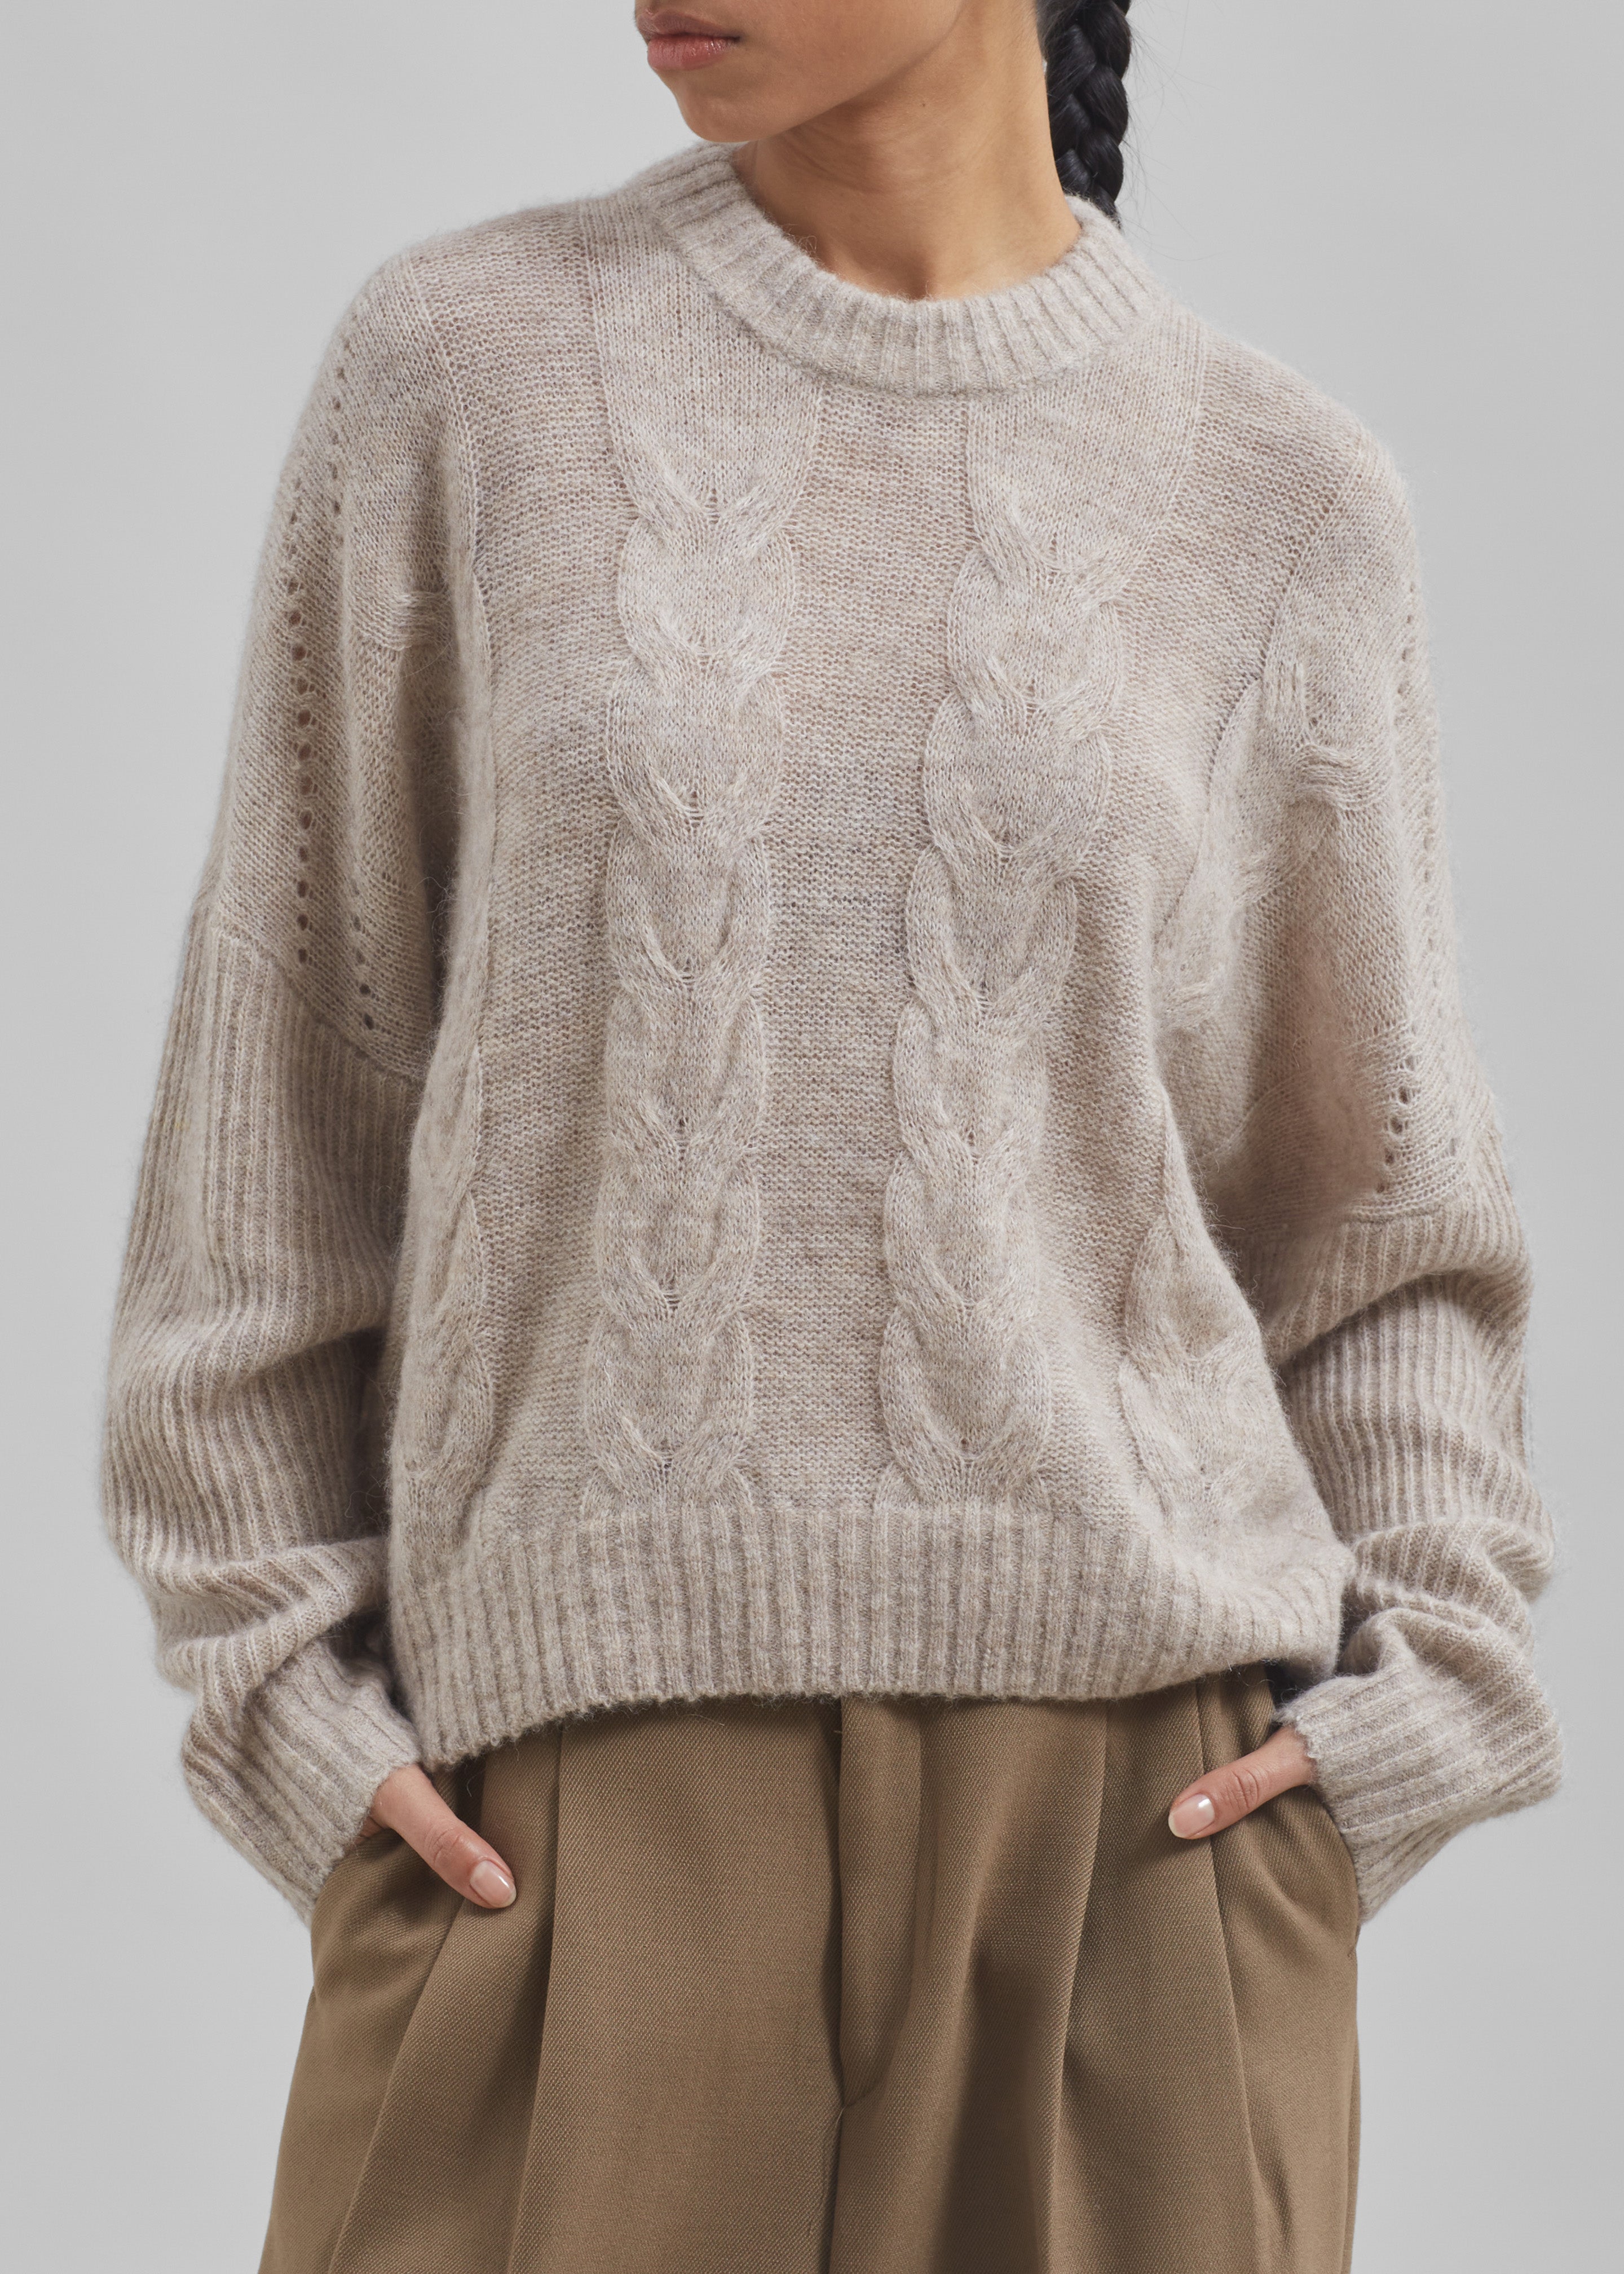 The Garment Verbier Boxy Cable Sweater - Linen - 2